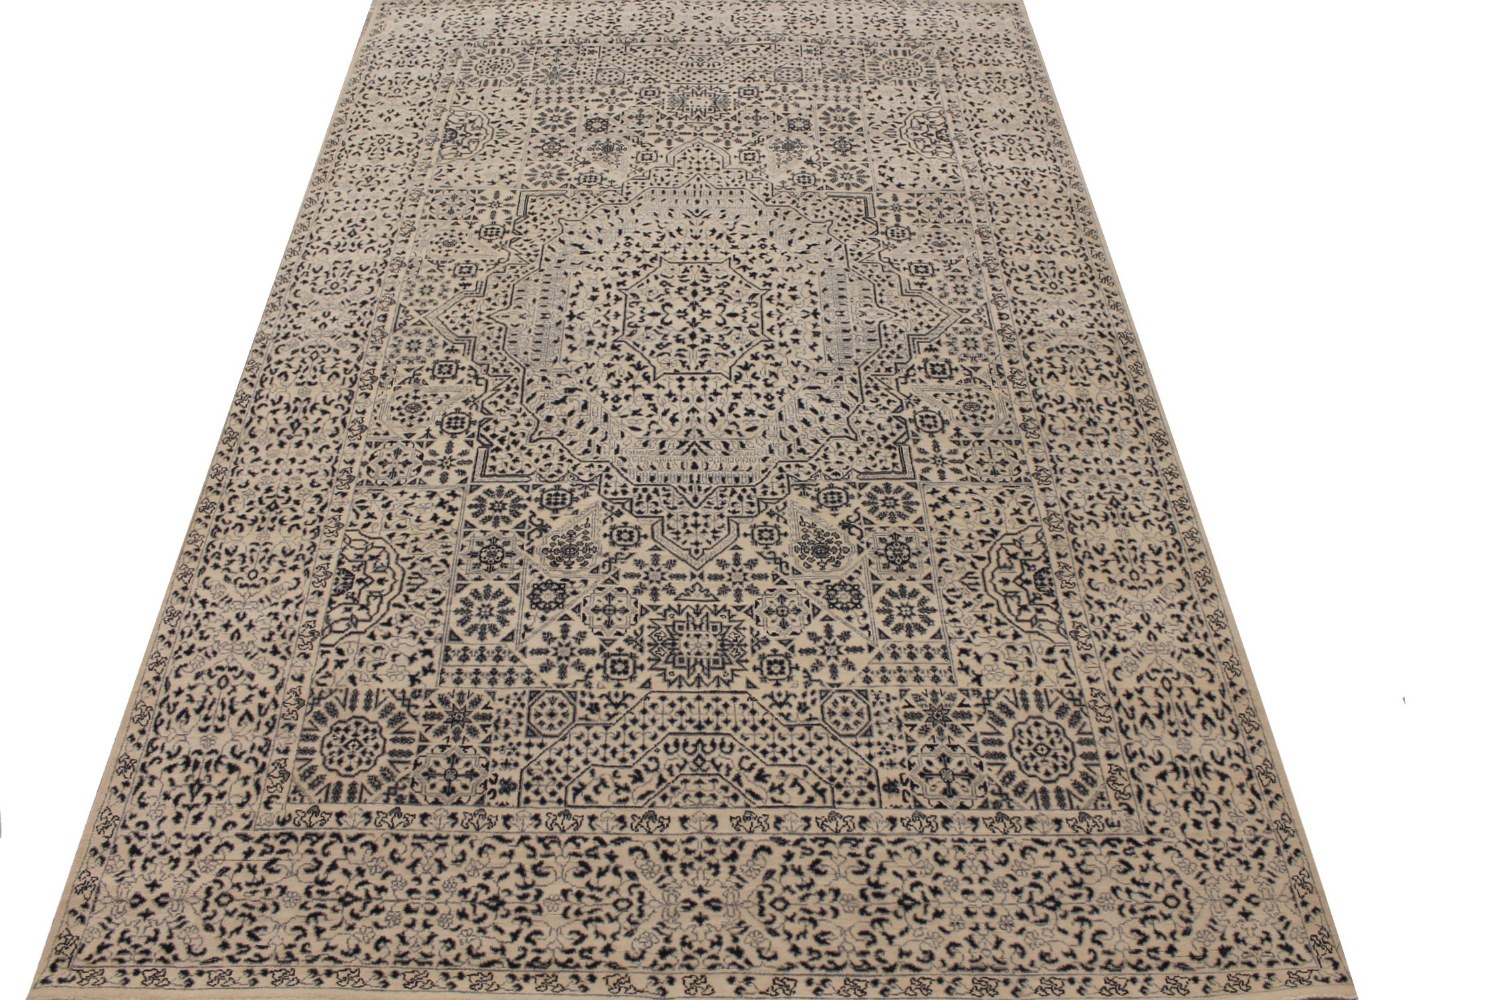 6x9 Aryana & Antique Revivals Hand Knotted Wool Area Rug - MR027456